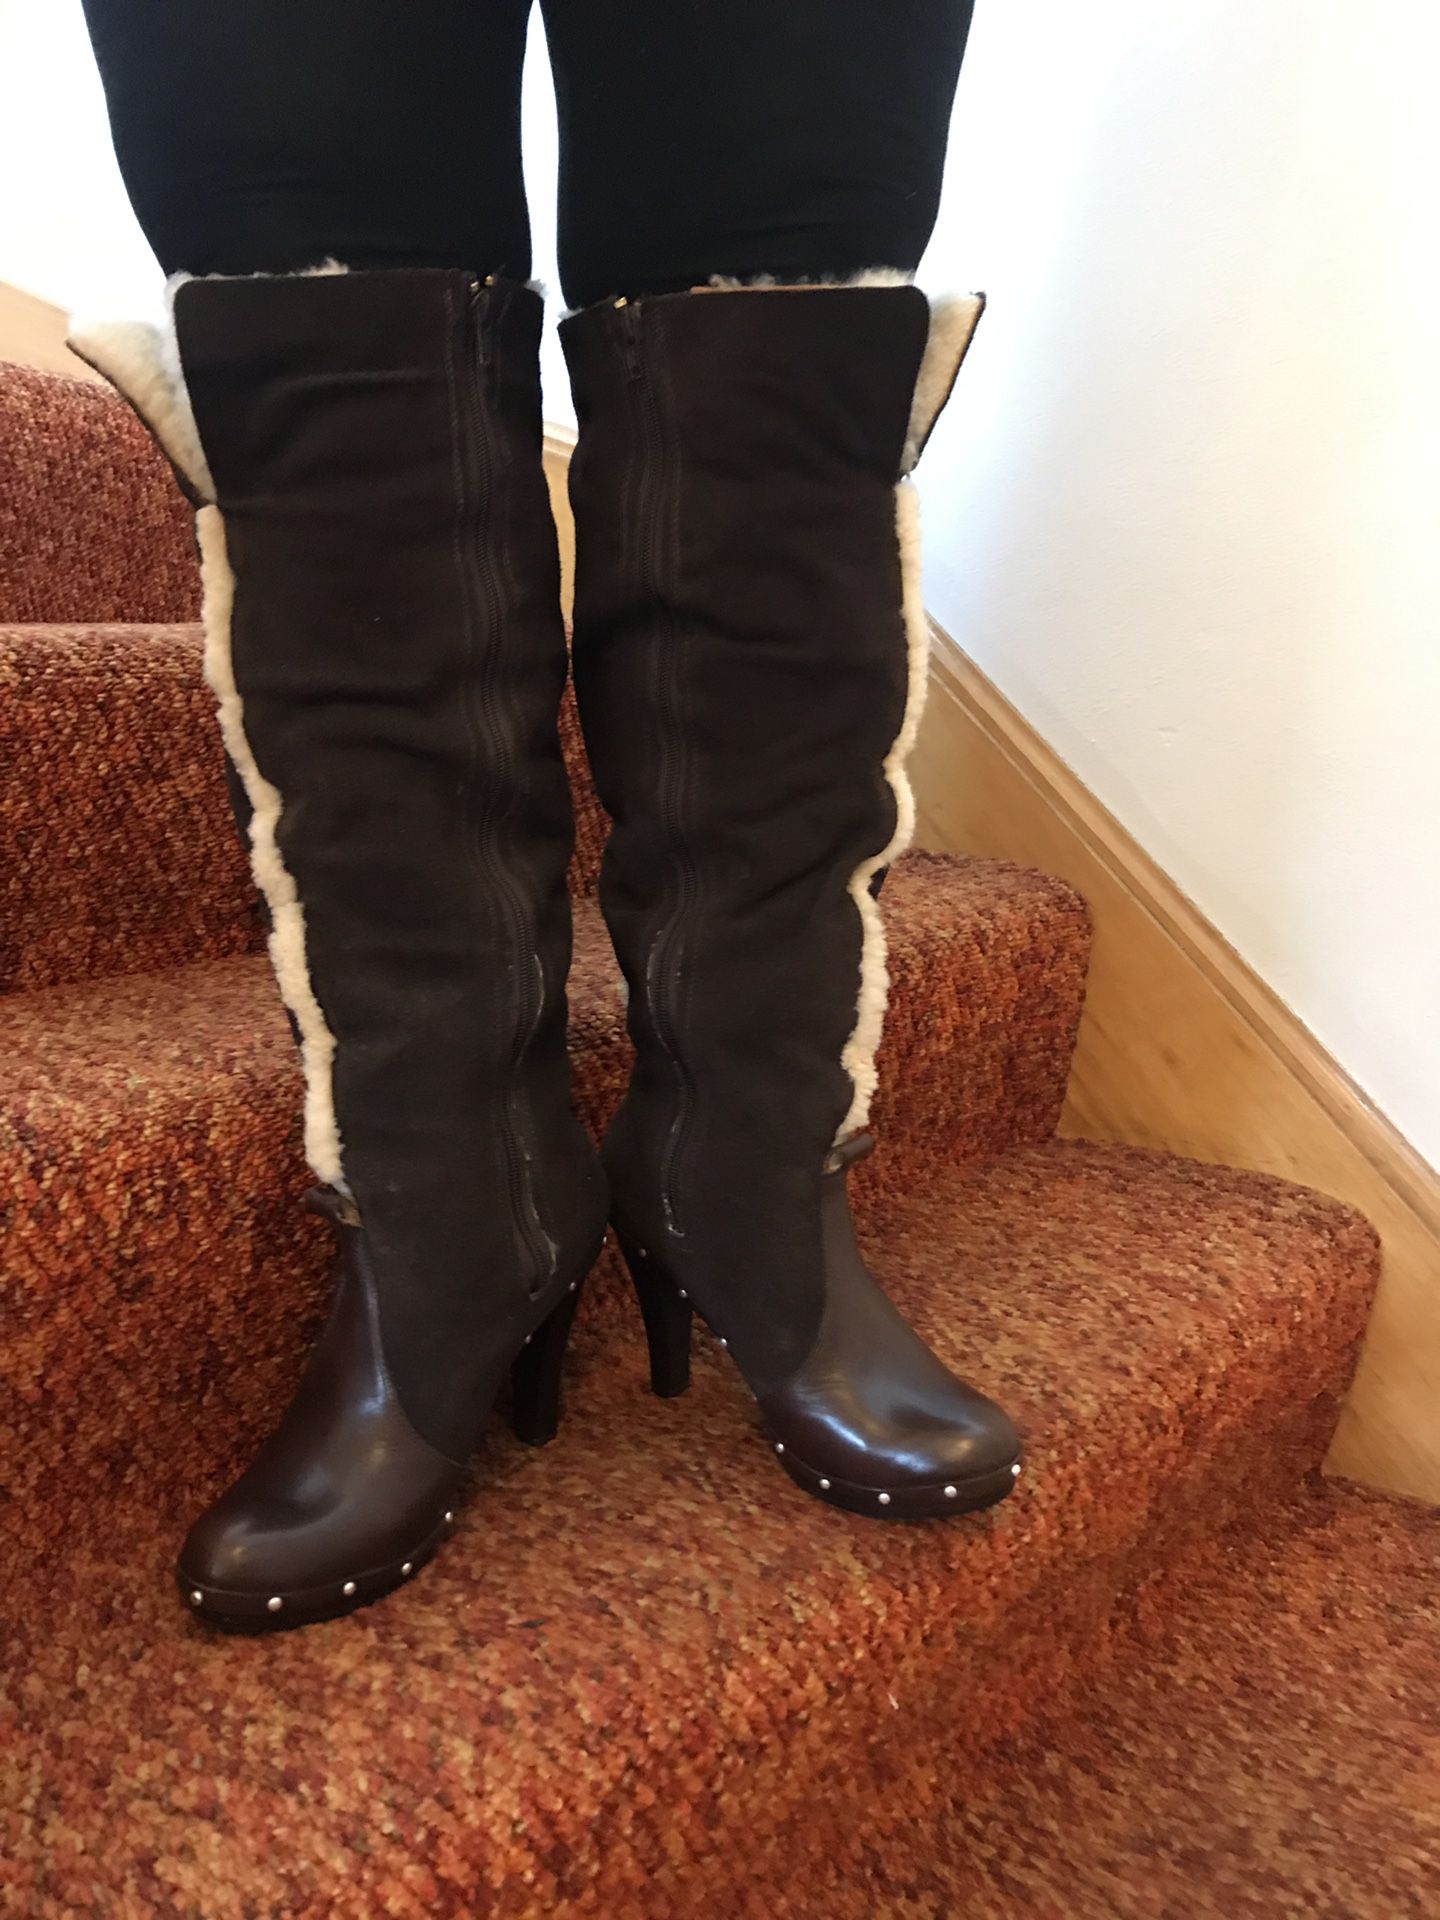 Michael Kors LEATHER / SUDE BOOTS size 9 BRAUN ,VERY VERY NICE,LIMITED EDITION,Look like New